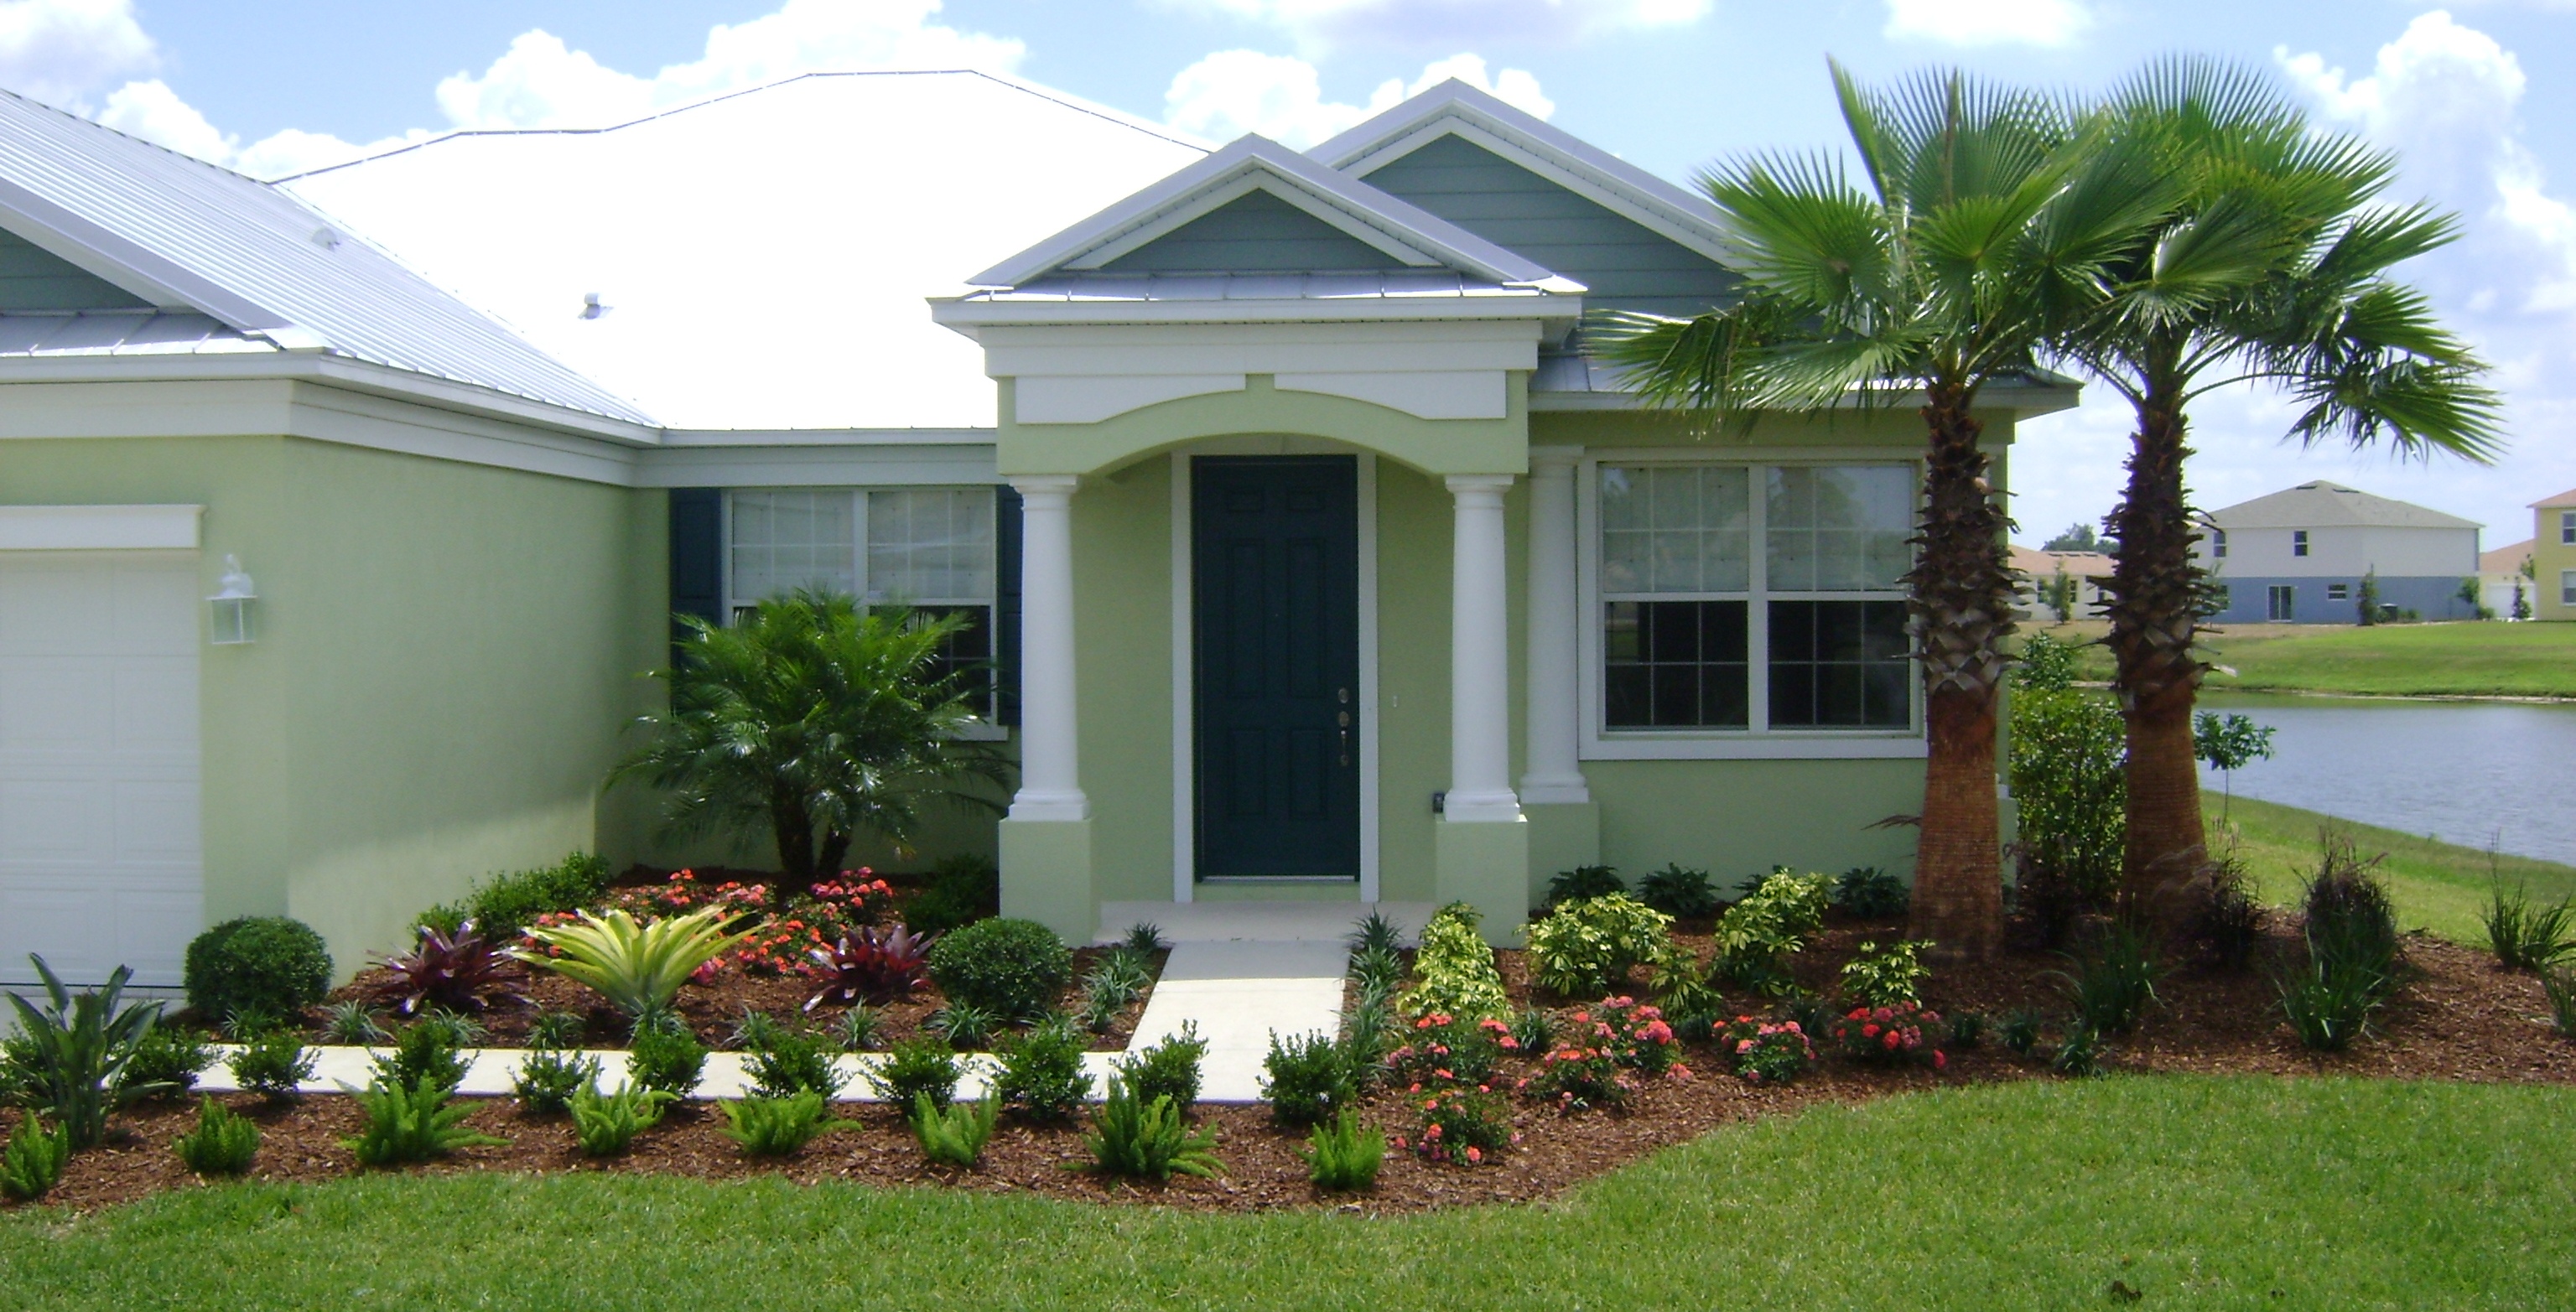 Landscaping Examples From Tampa S Landscaping Expert